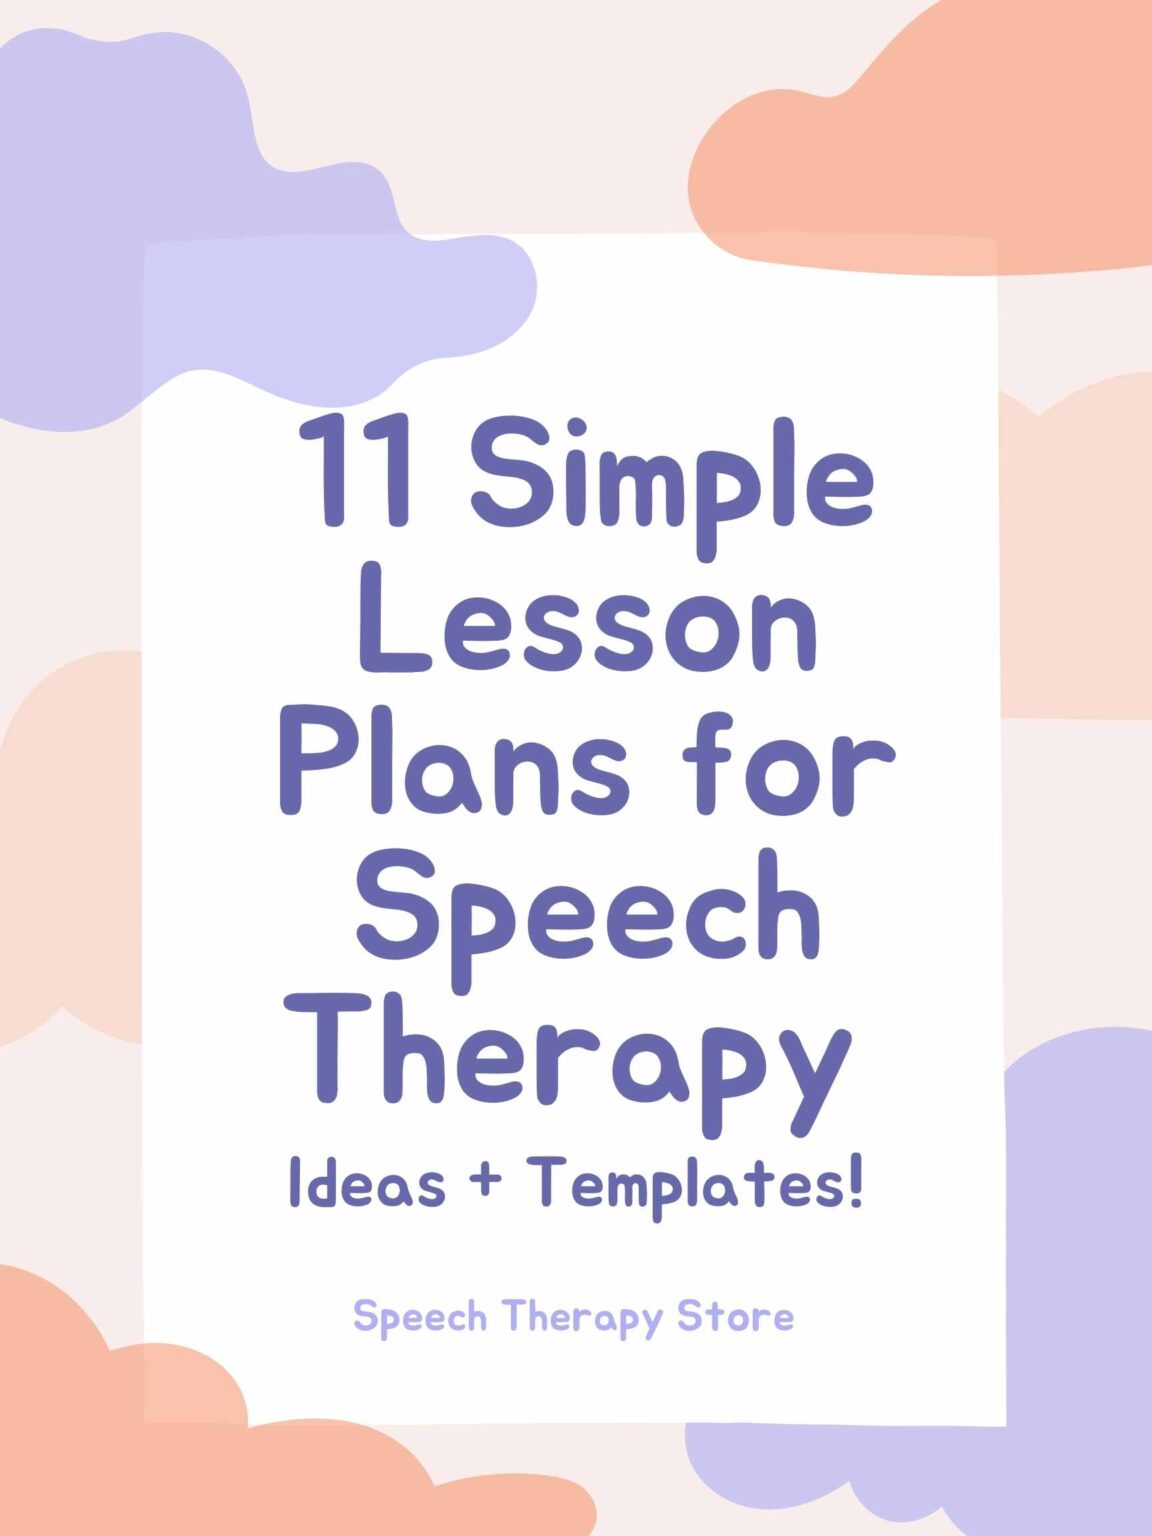 11-simple-lesson-plans-for-speech-therapy-ideas-templates-speech